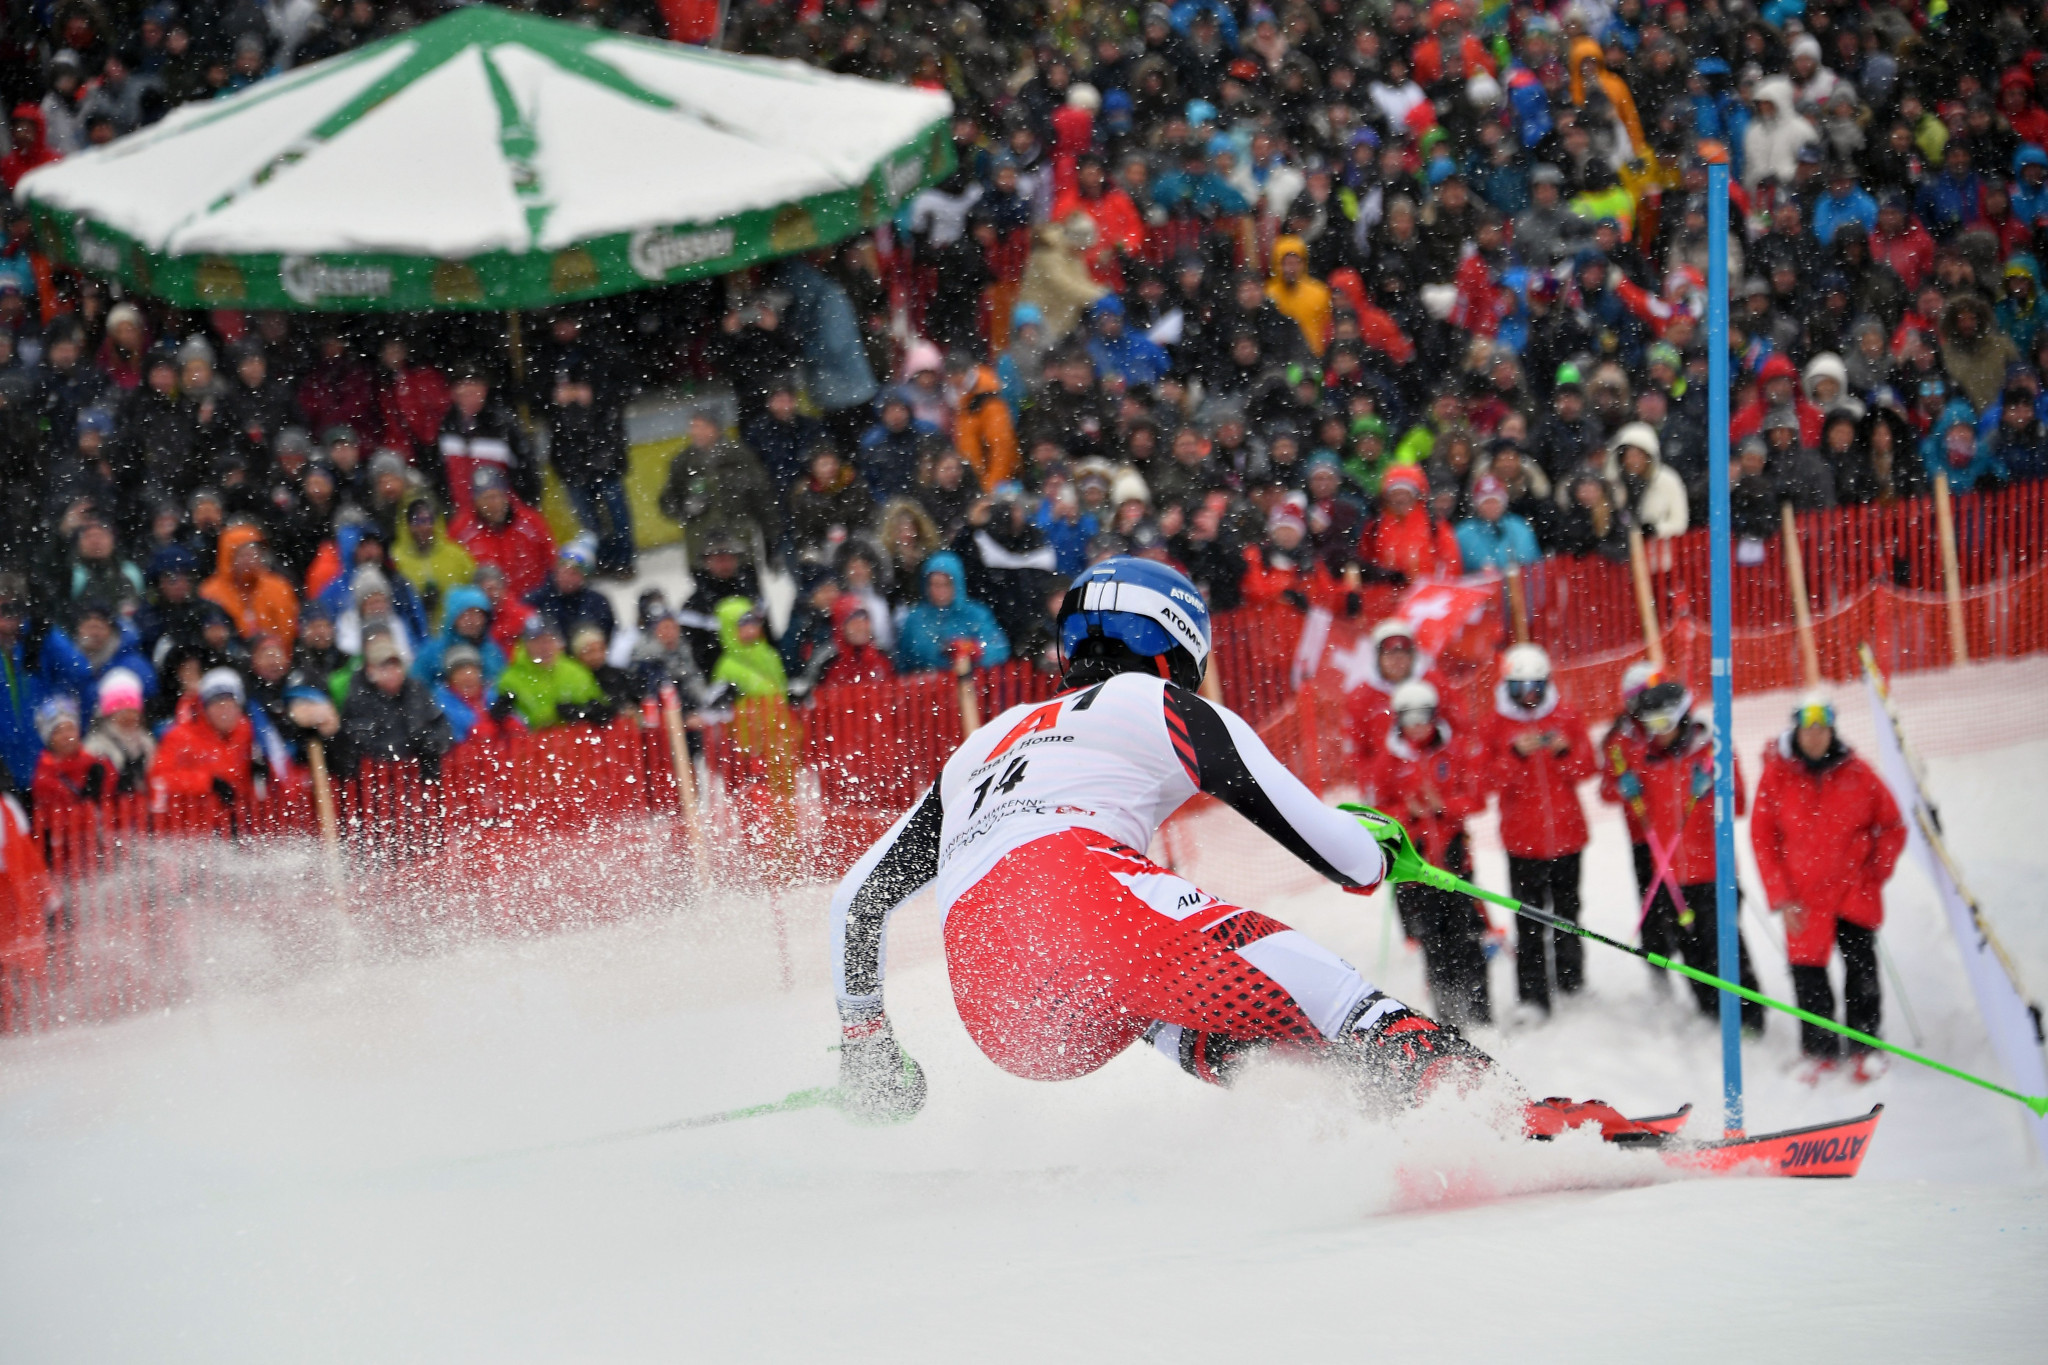 Austria's Marco Schwarz proved a strong slalom skier to round off the medal positions ©Getty Images